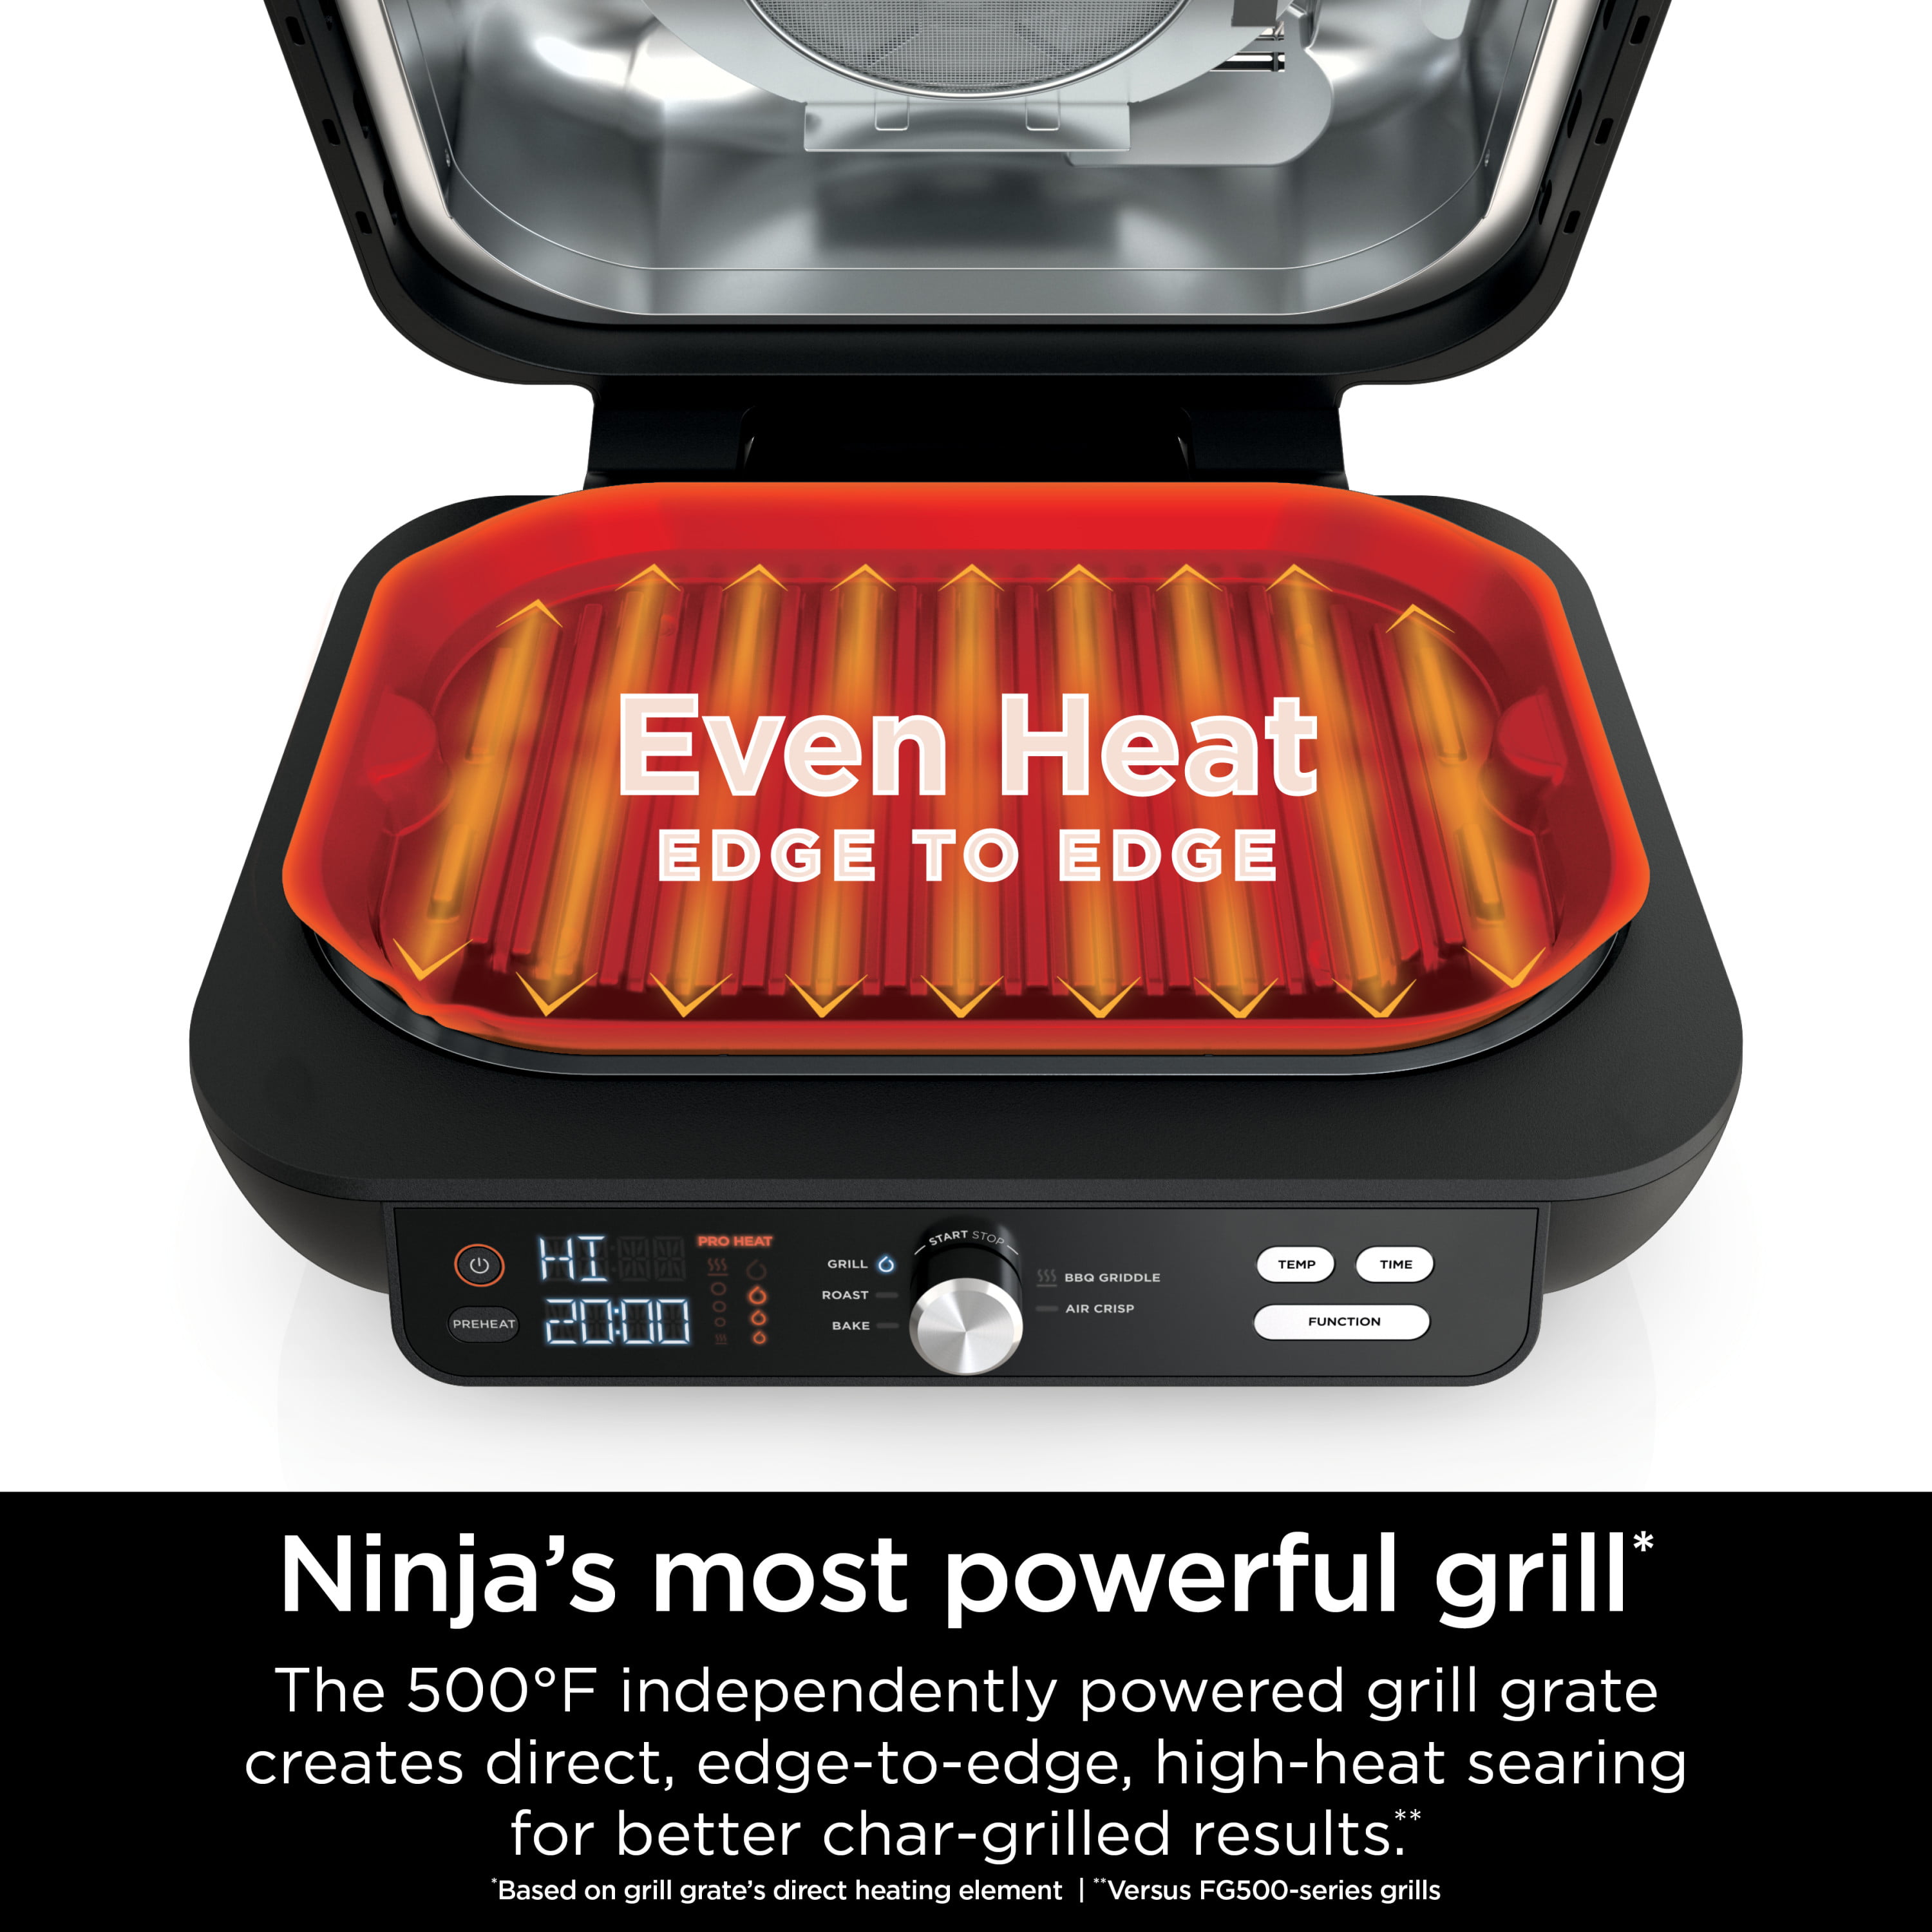 Ninja Foodi XL Pro 5-in-1 Indoor Grill & Griddle with 4-Quart Air